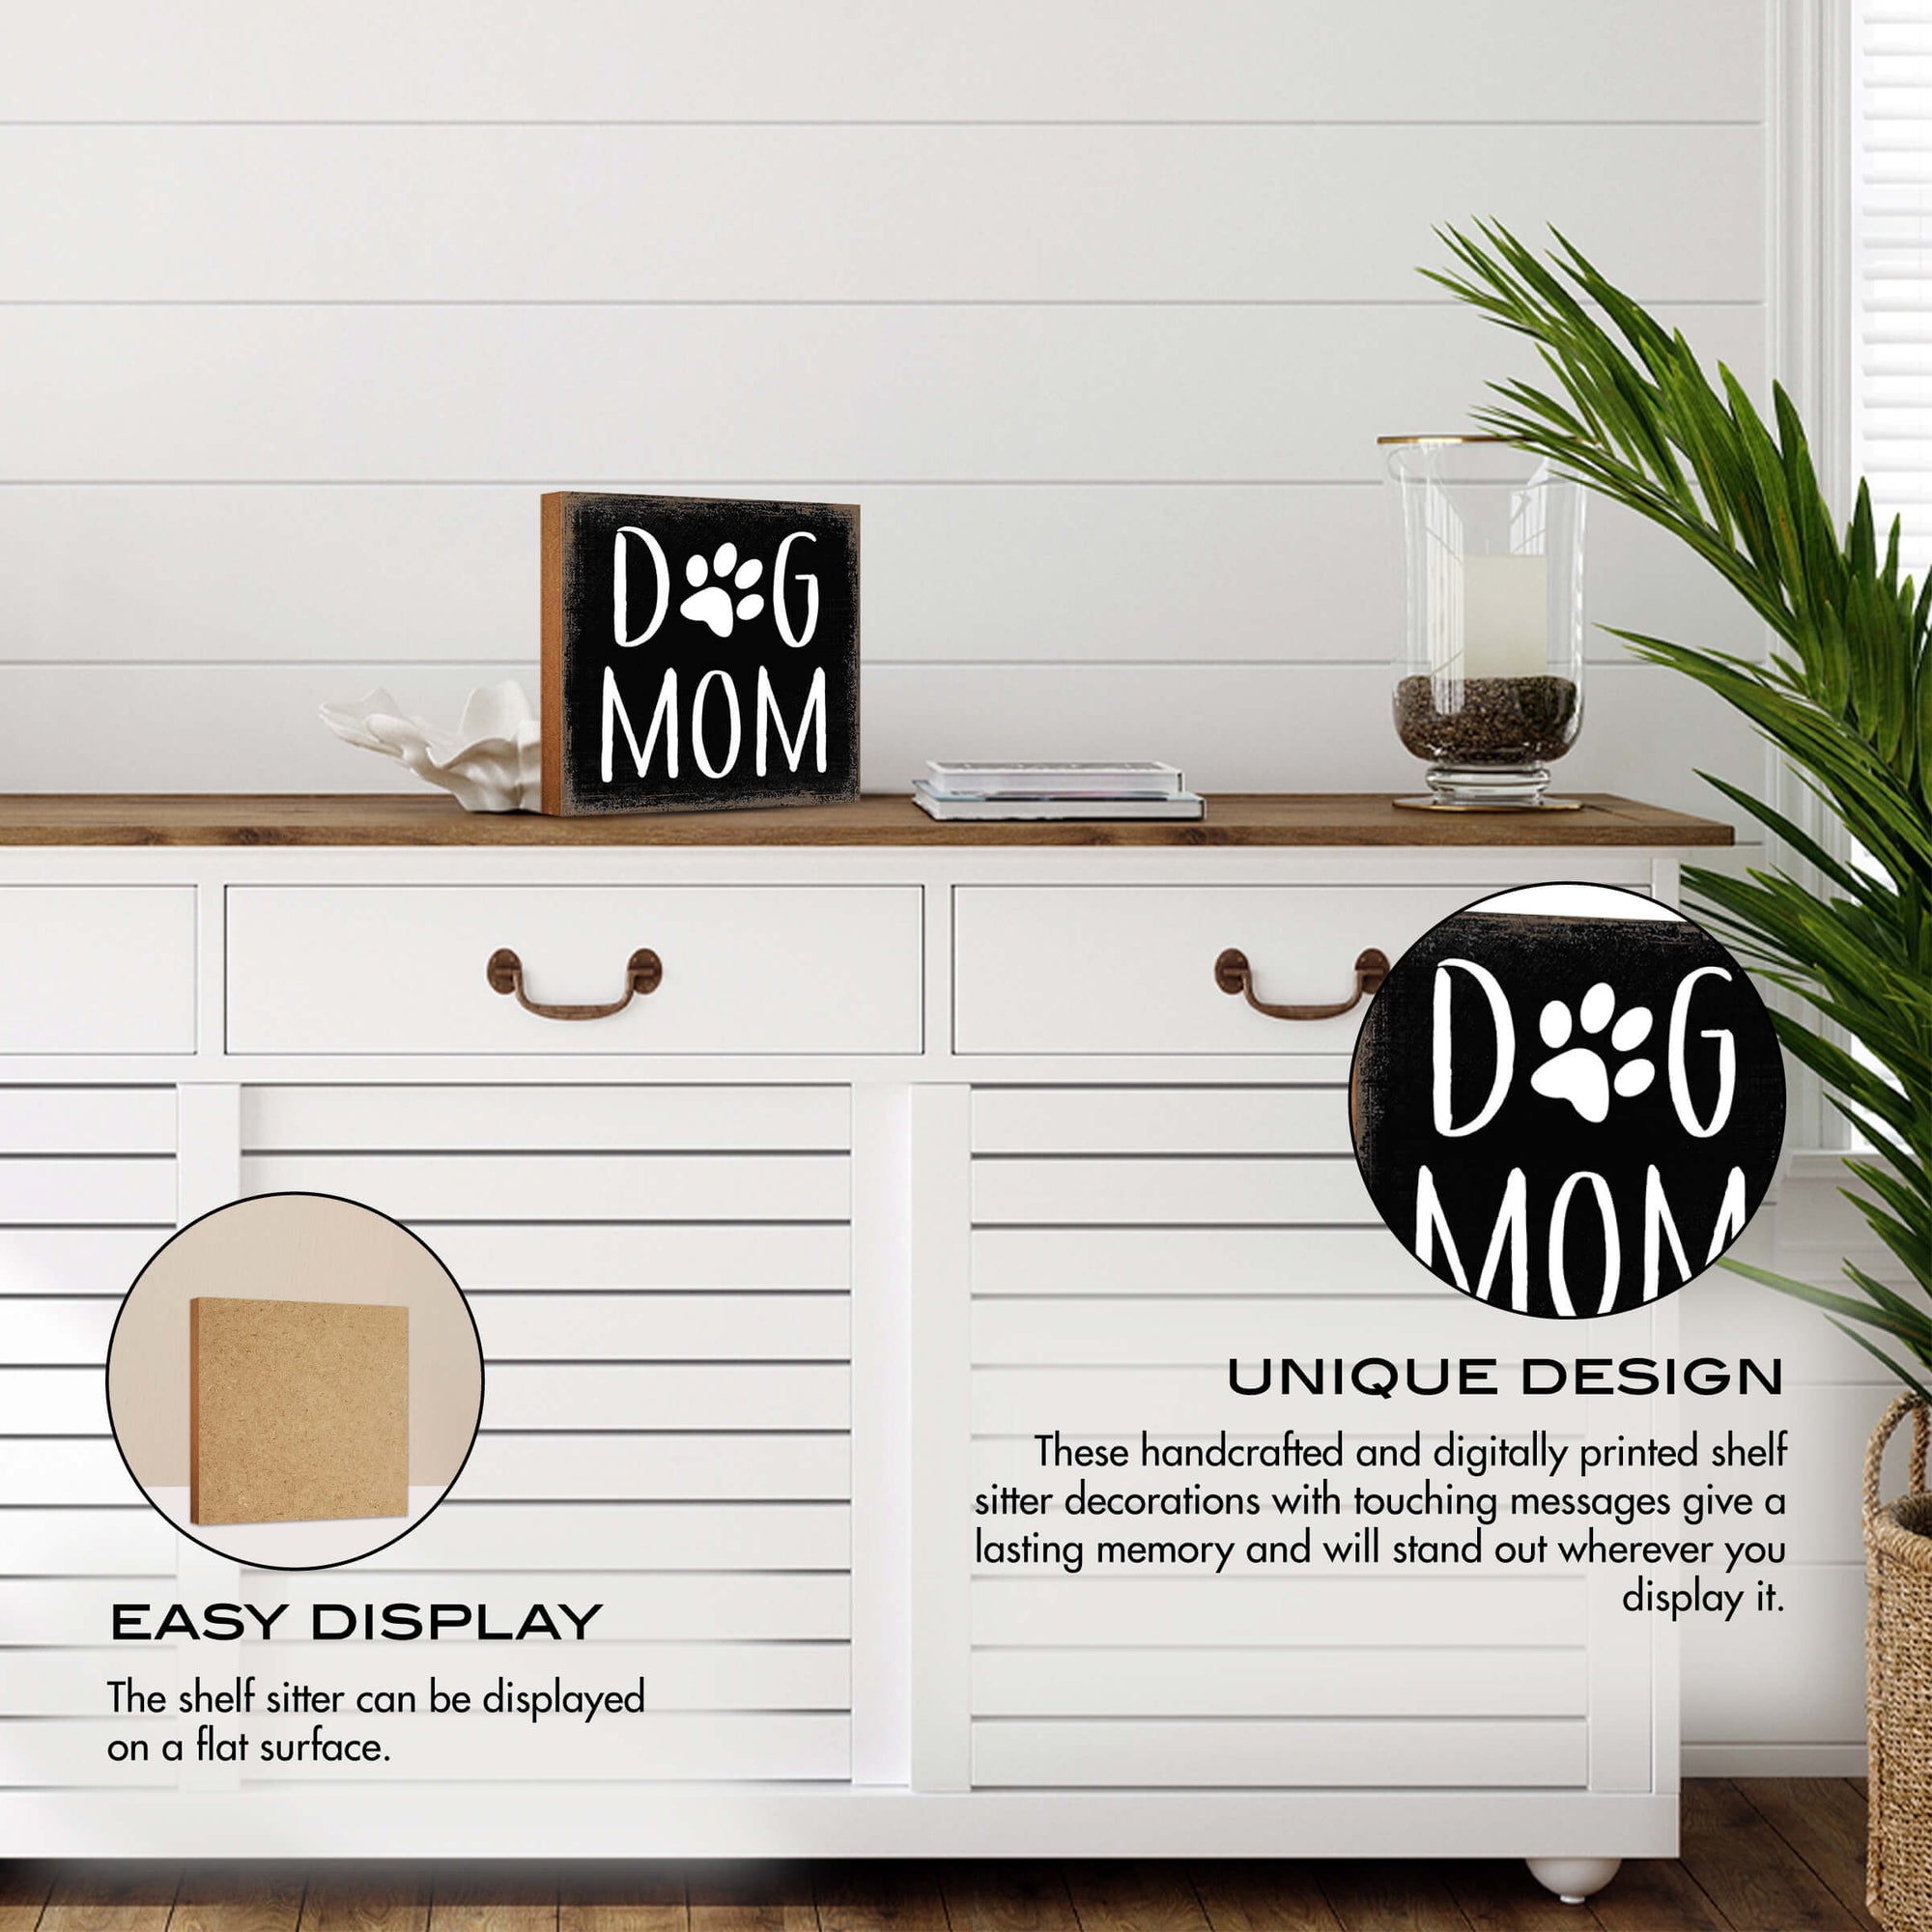 Wooden Shelf Decor and Tabletop Signs with Pet Verses - Dog Mom